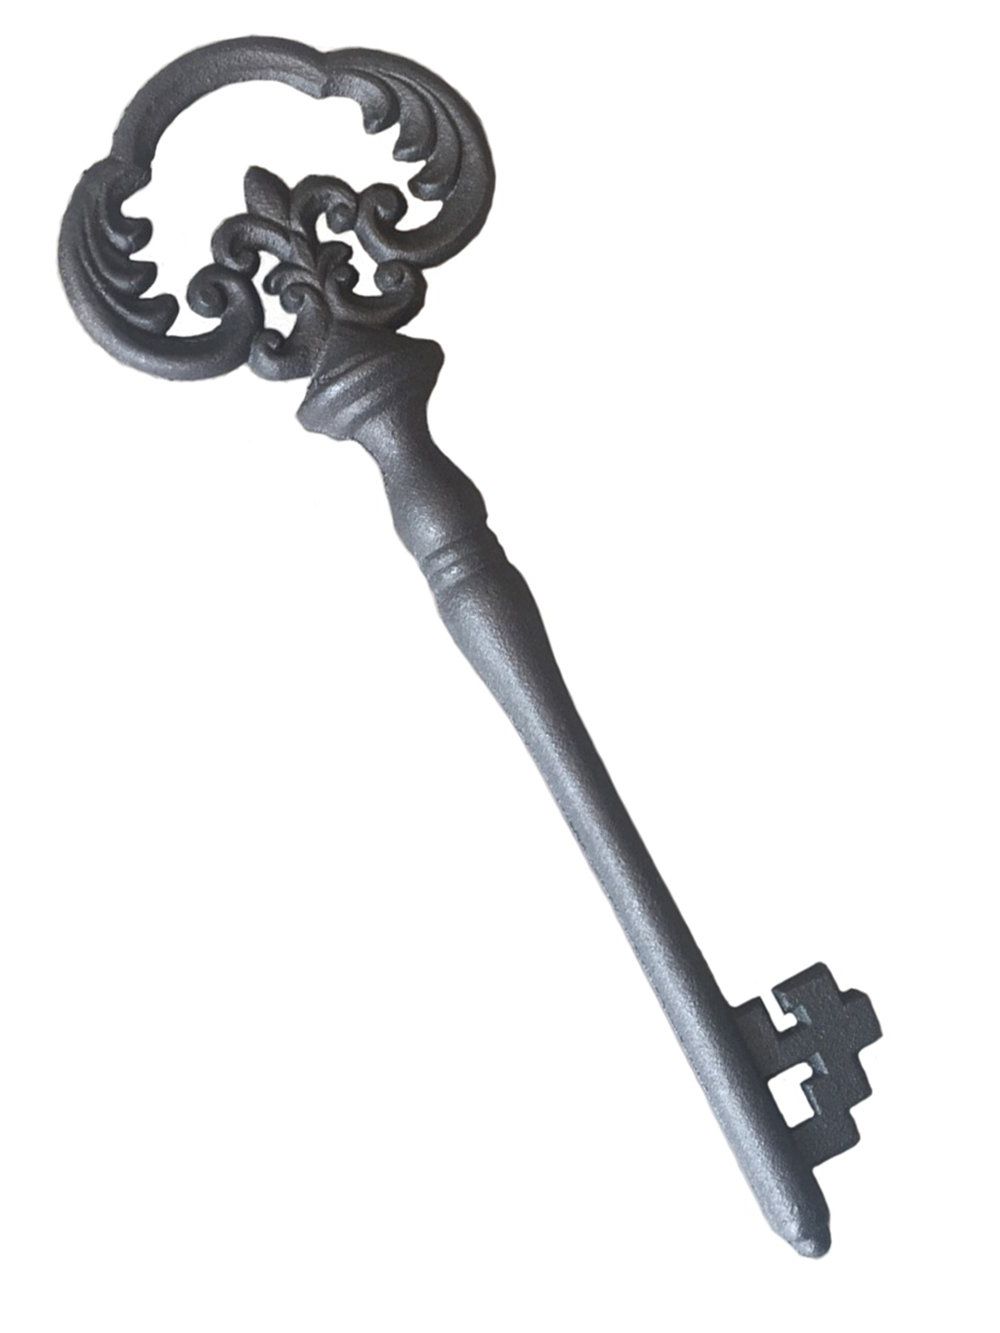 Most Current Black Metal Key Wall Decor Throughout Amazon: Pertty Vintage Cast Iron Decorative Key Wrought Iron (View 10 of 20)